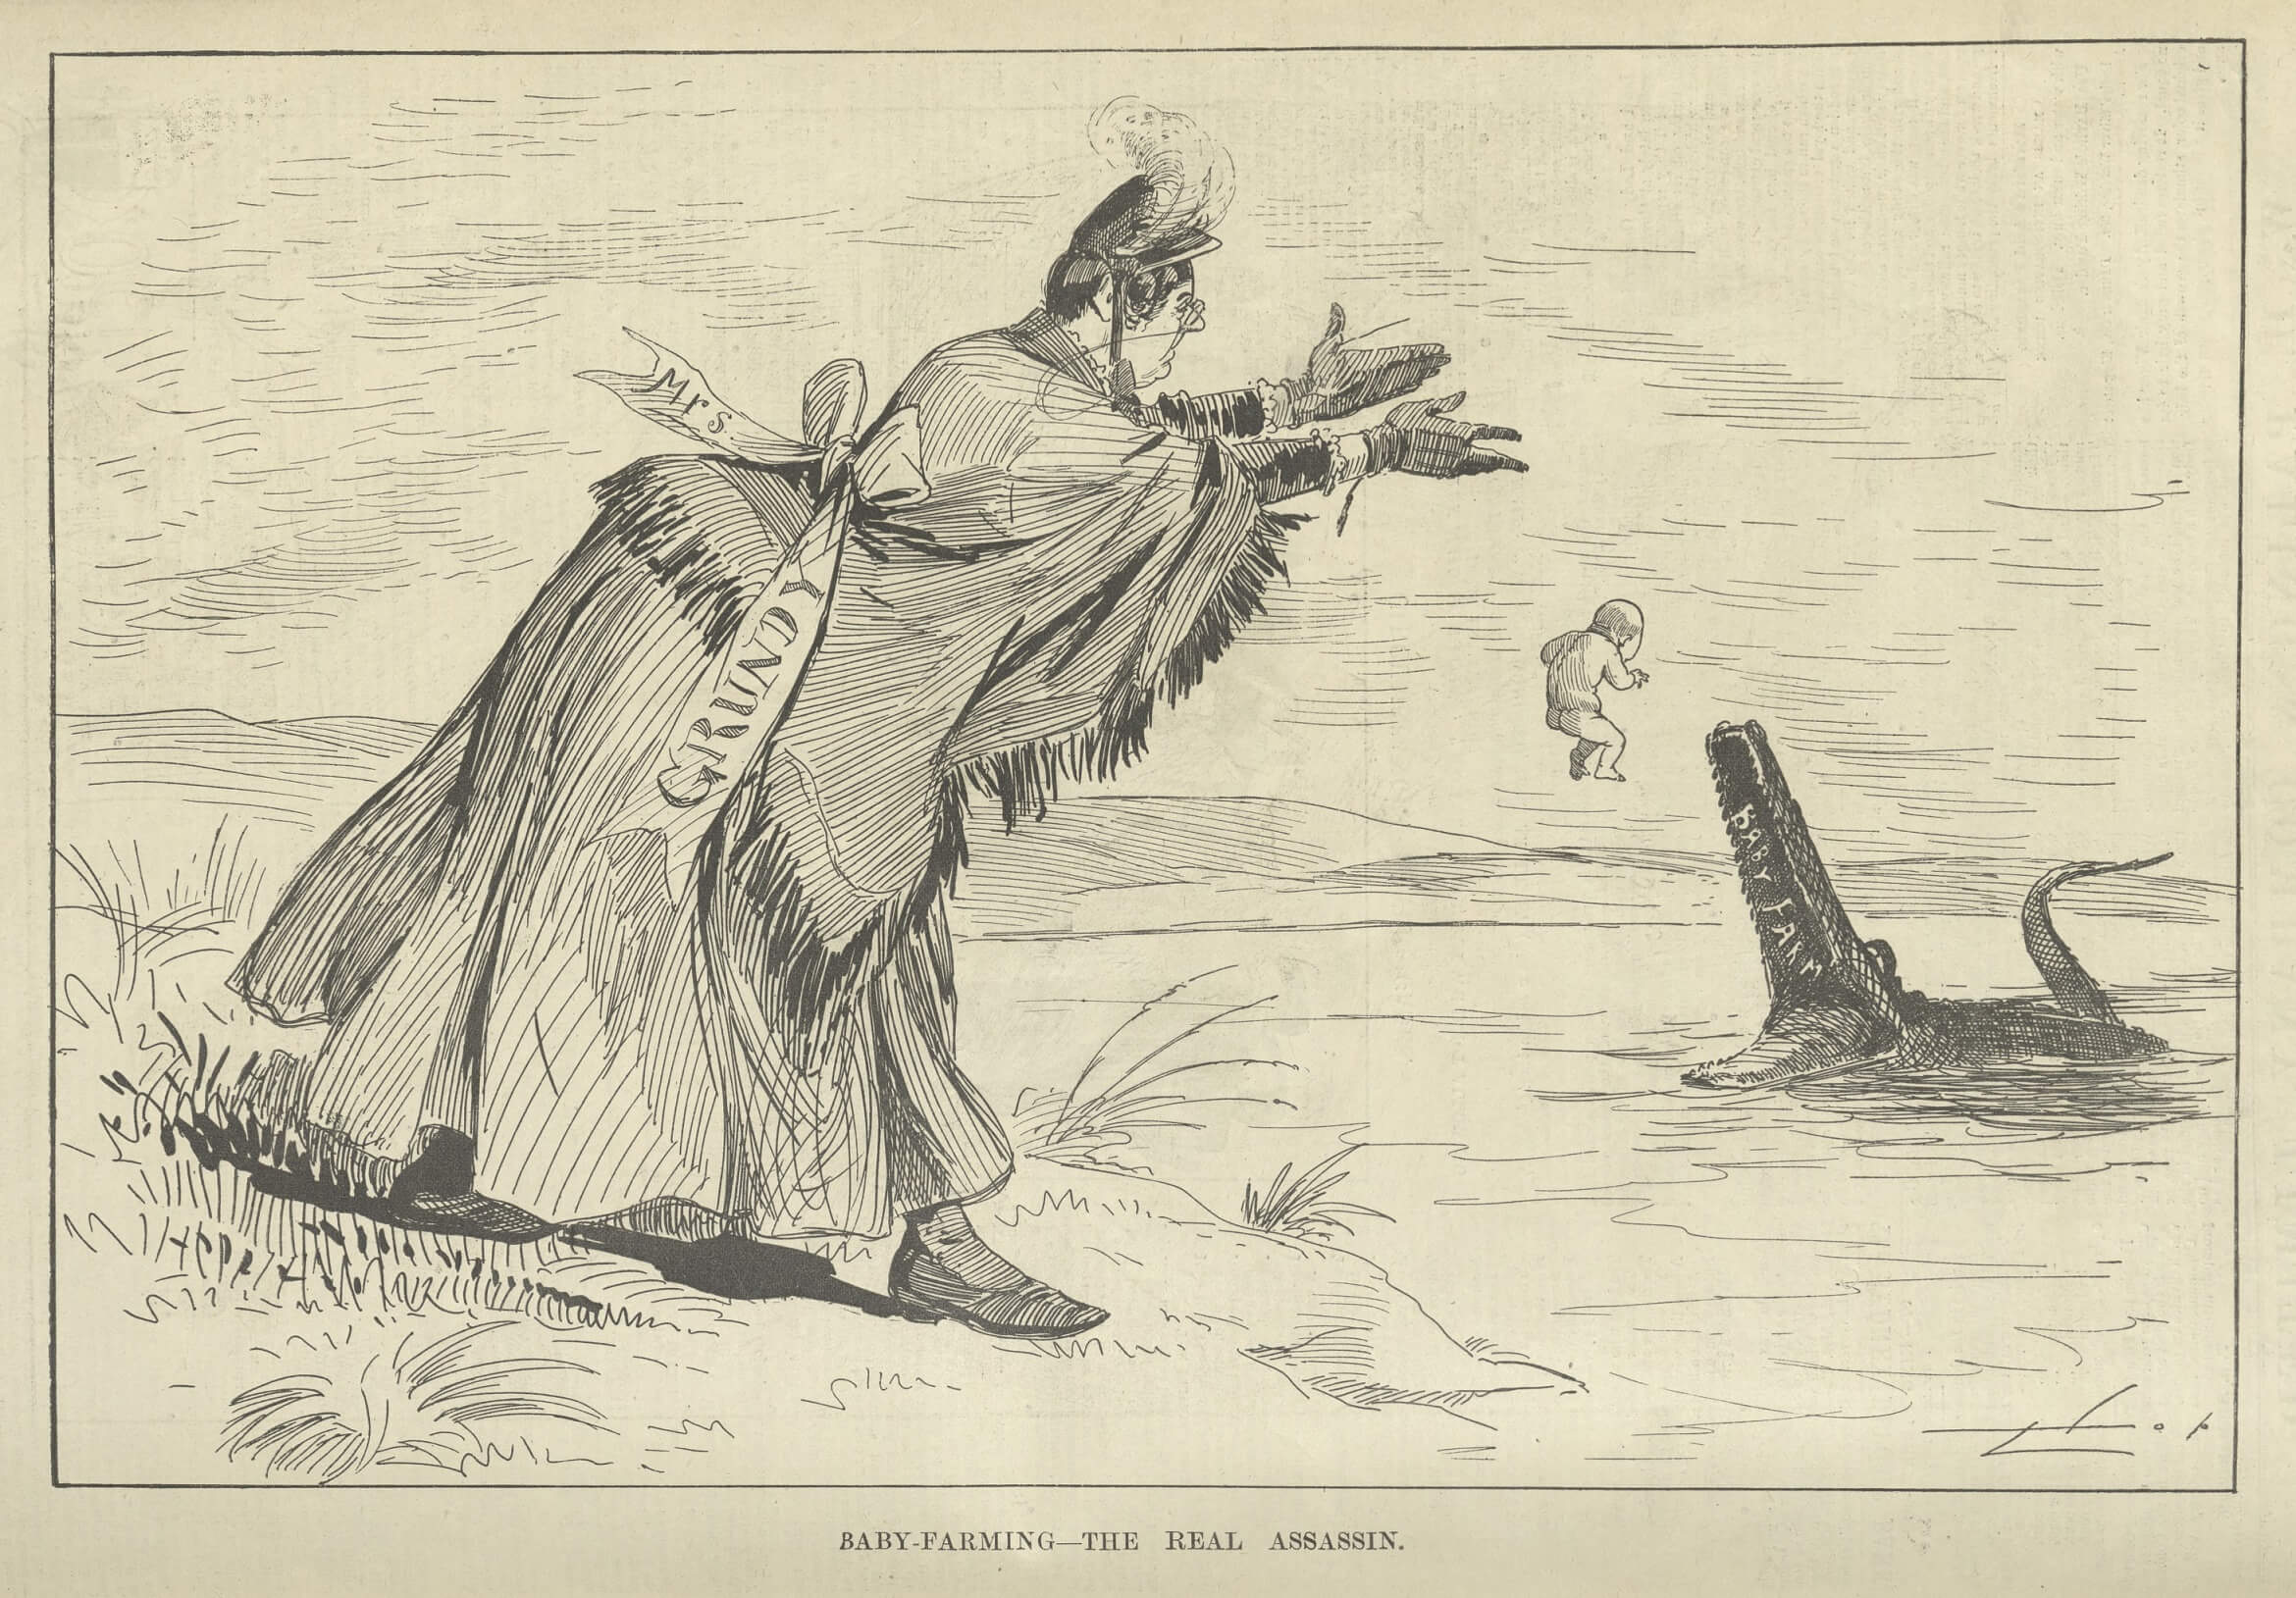 Mrs. Grundy, an icon of Victorian respectability, throws a naked infant to a crocodile in this cartoon, Baby Farming – the real assassin, Bulletin, 1890 Reproduced courtesy National Library of Australia